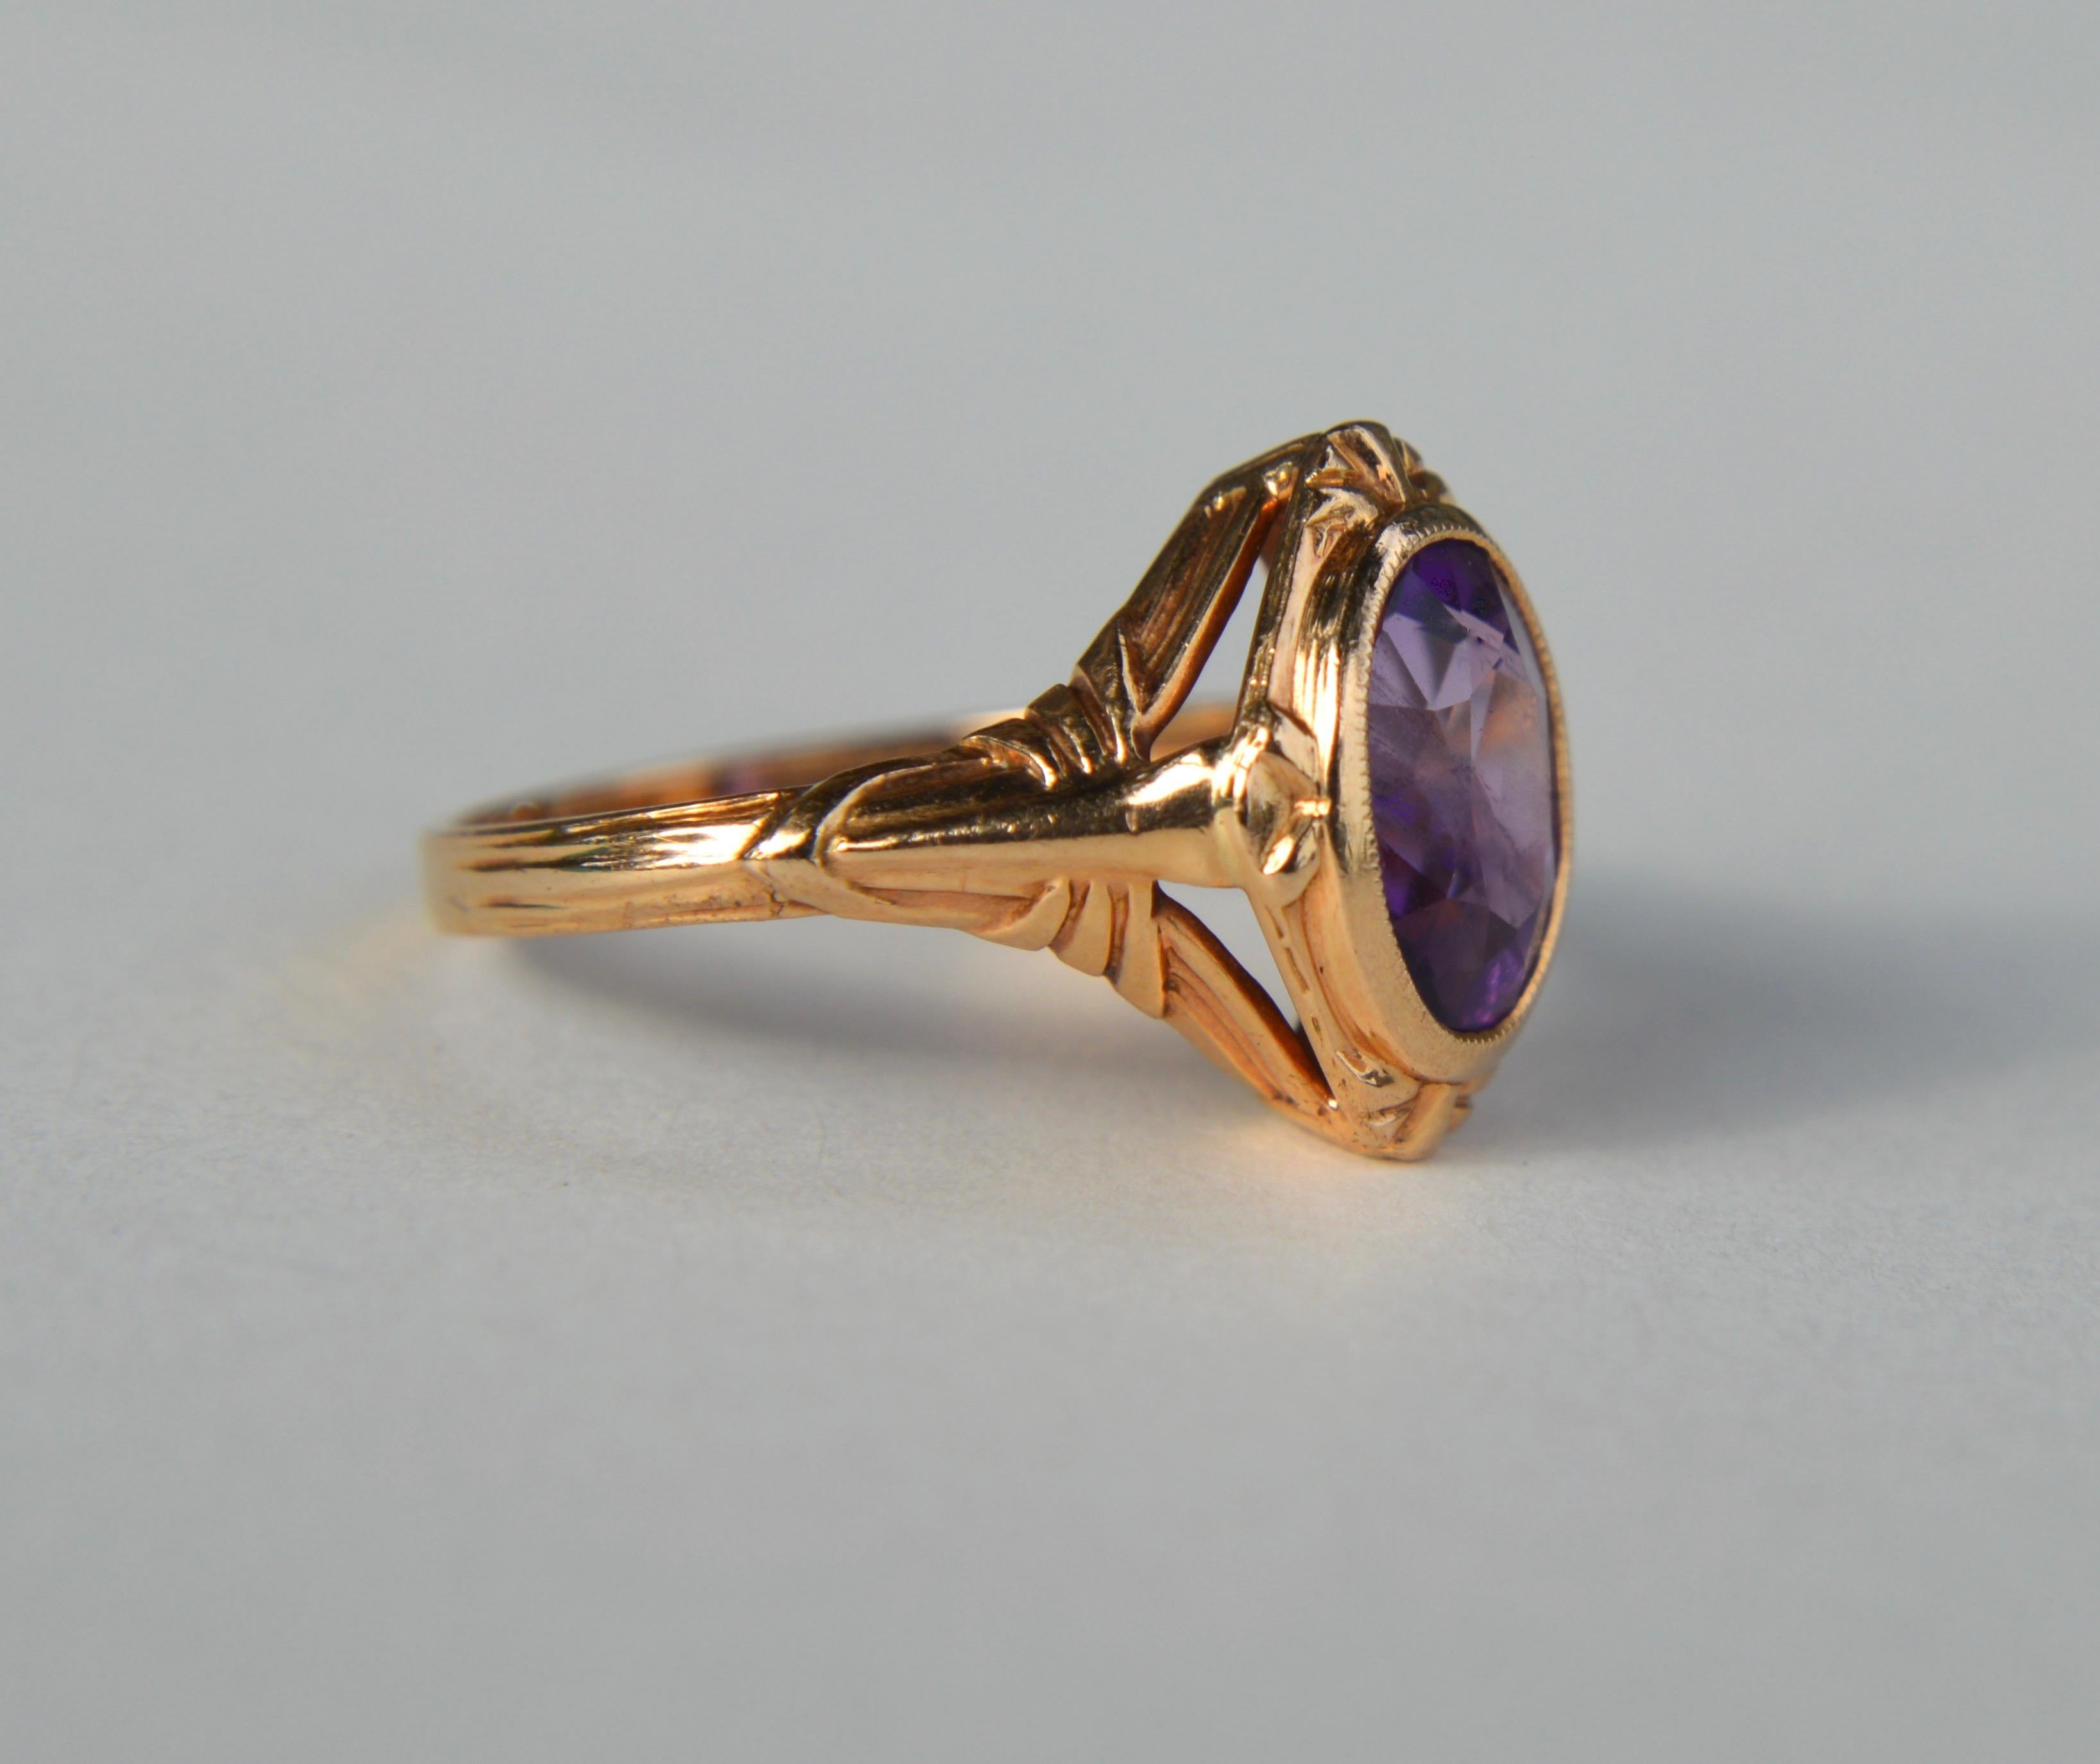 Beautiful Art Deco era antique circa 1920s 14K rose gold 1.41 carat oval cut natural amethyst ring (9x7mm). In very good condition. The amethyst has internal diagonal striation inclusions that are not structural damage or cracks. It is nonetheless